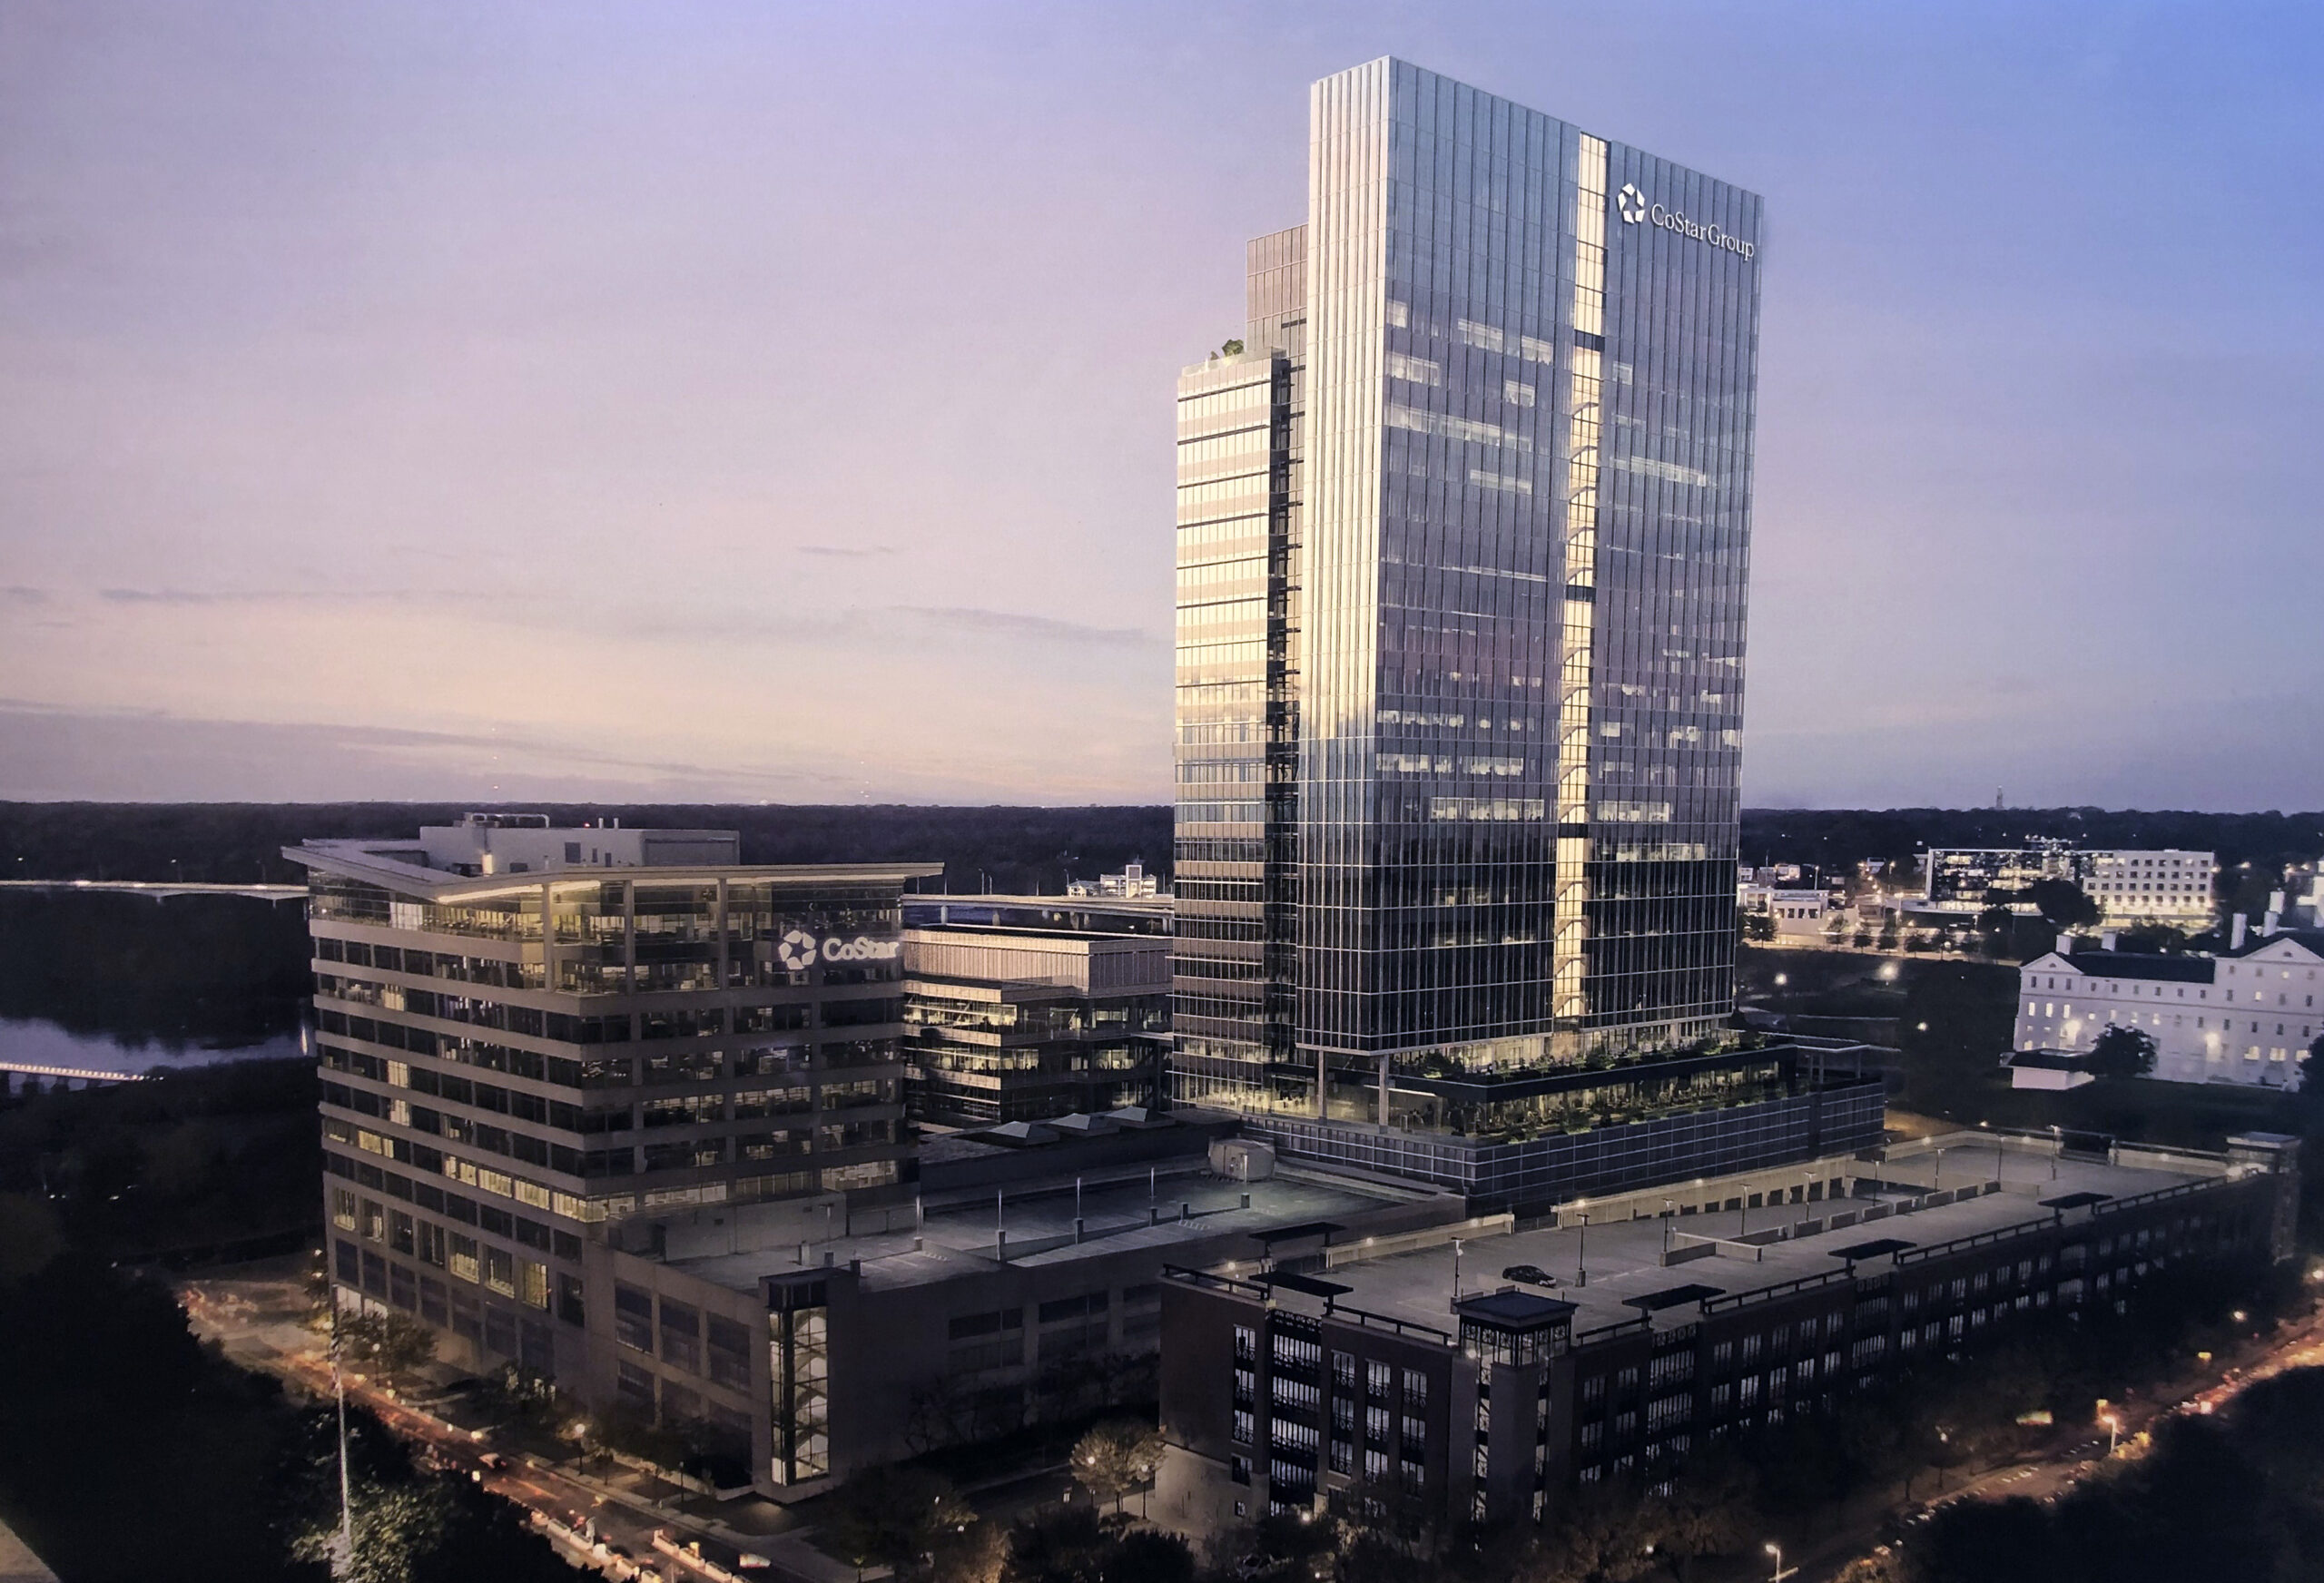 Updated: CoStar will build the state’s tallest building along the riverbank in Richmond